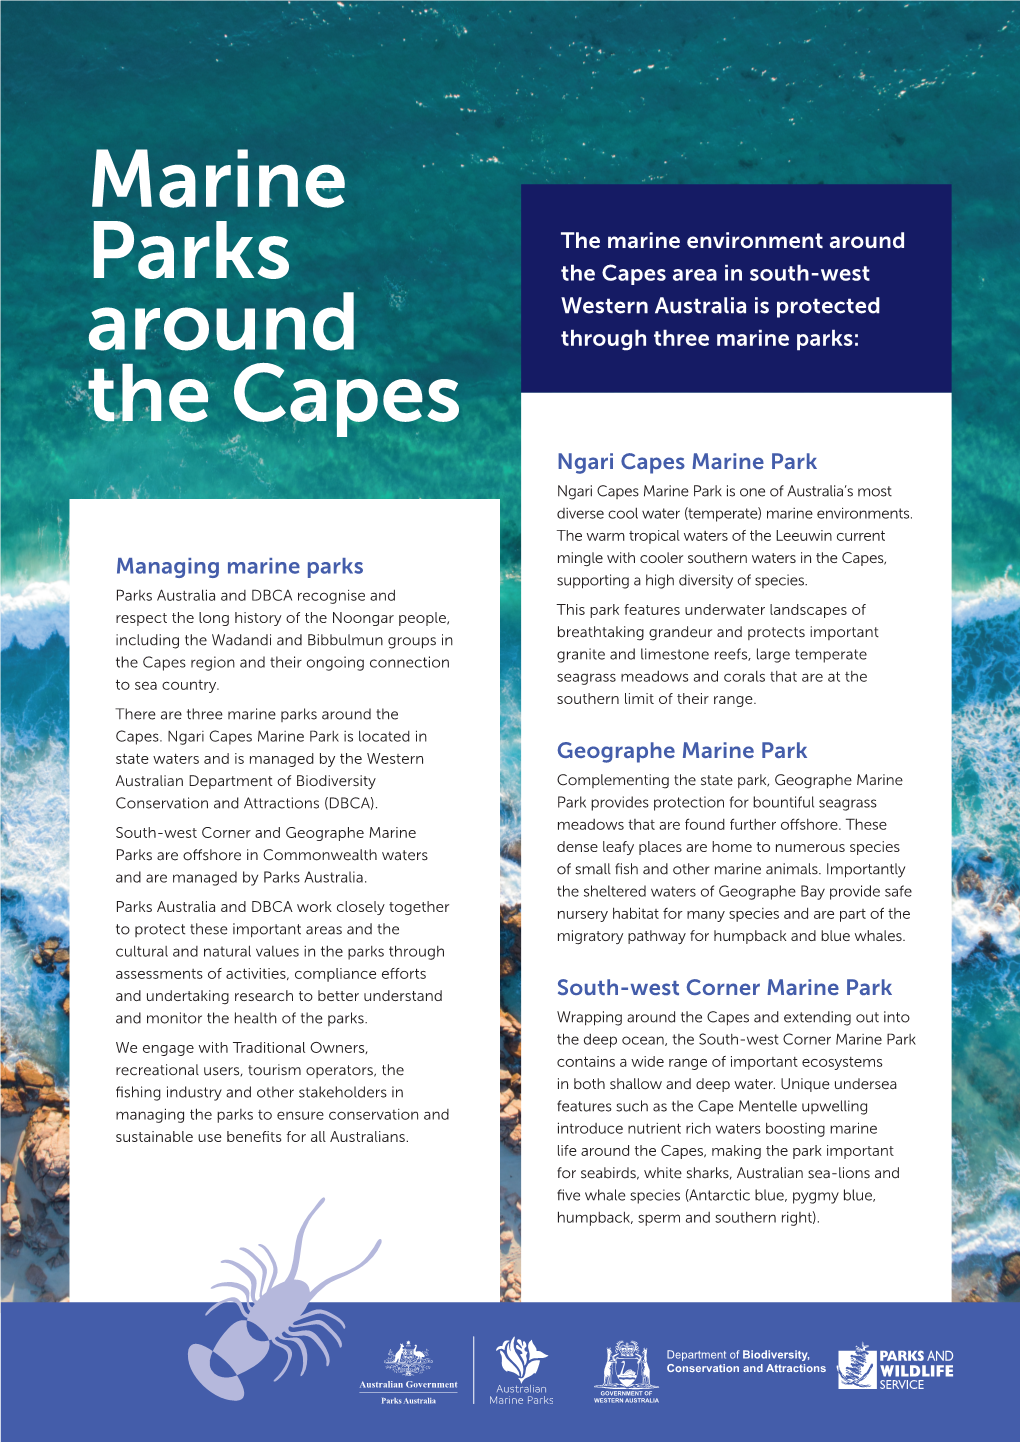 Marine Parks Around the Capes